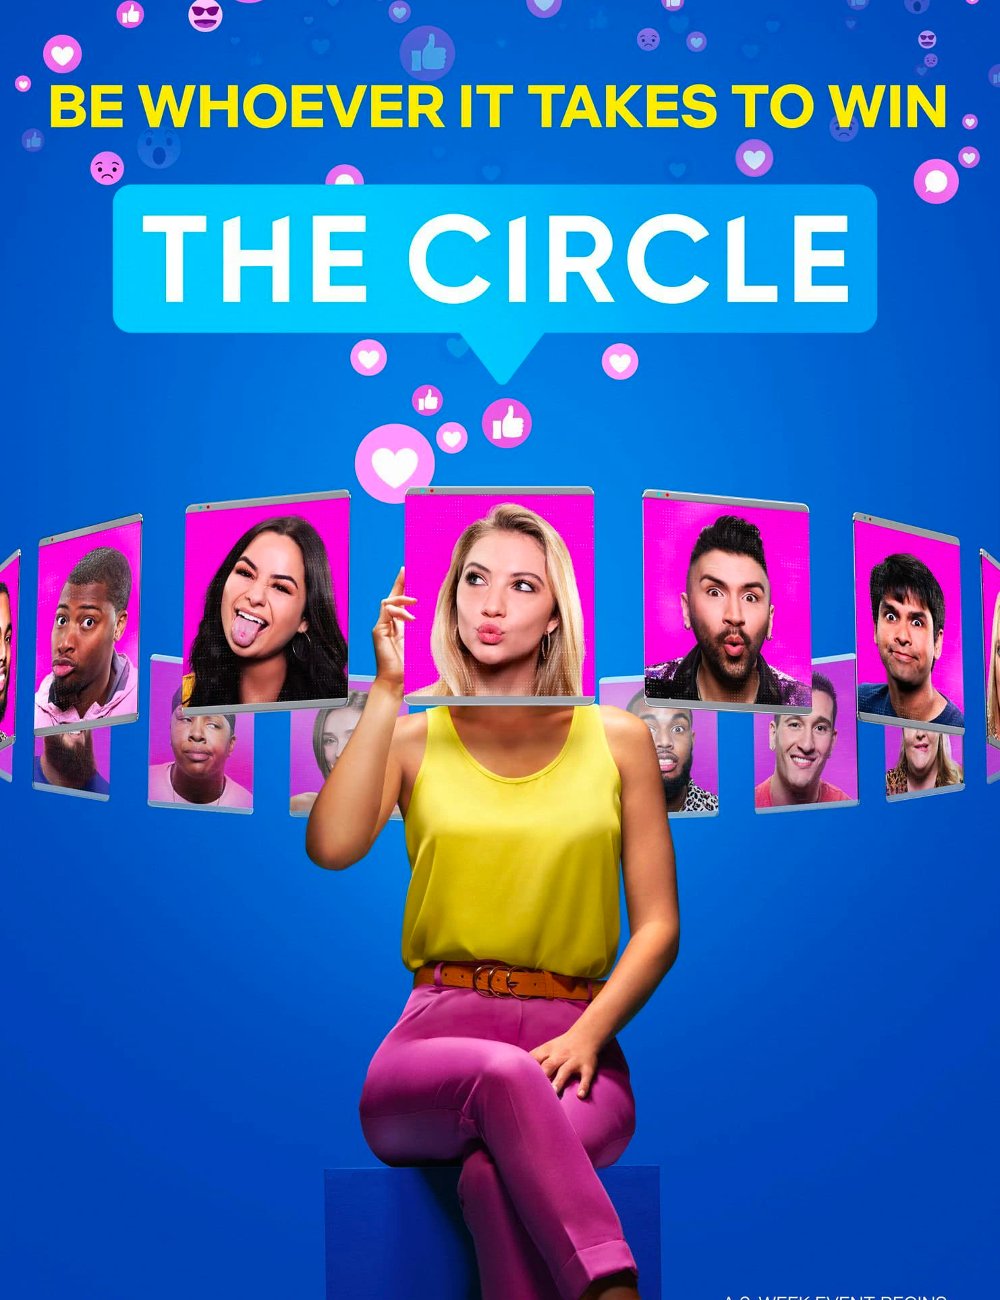 The Circle - assistir - reality shows - Netflix - melhores reality shows - https://stealthelook.com.br